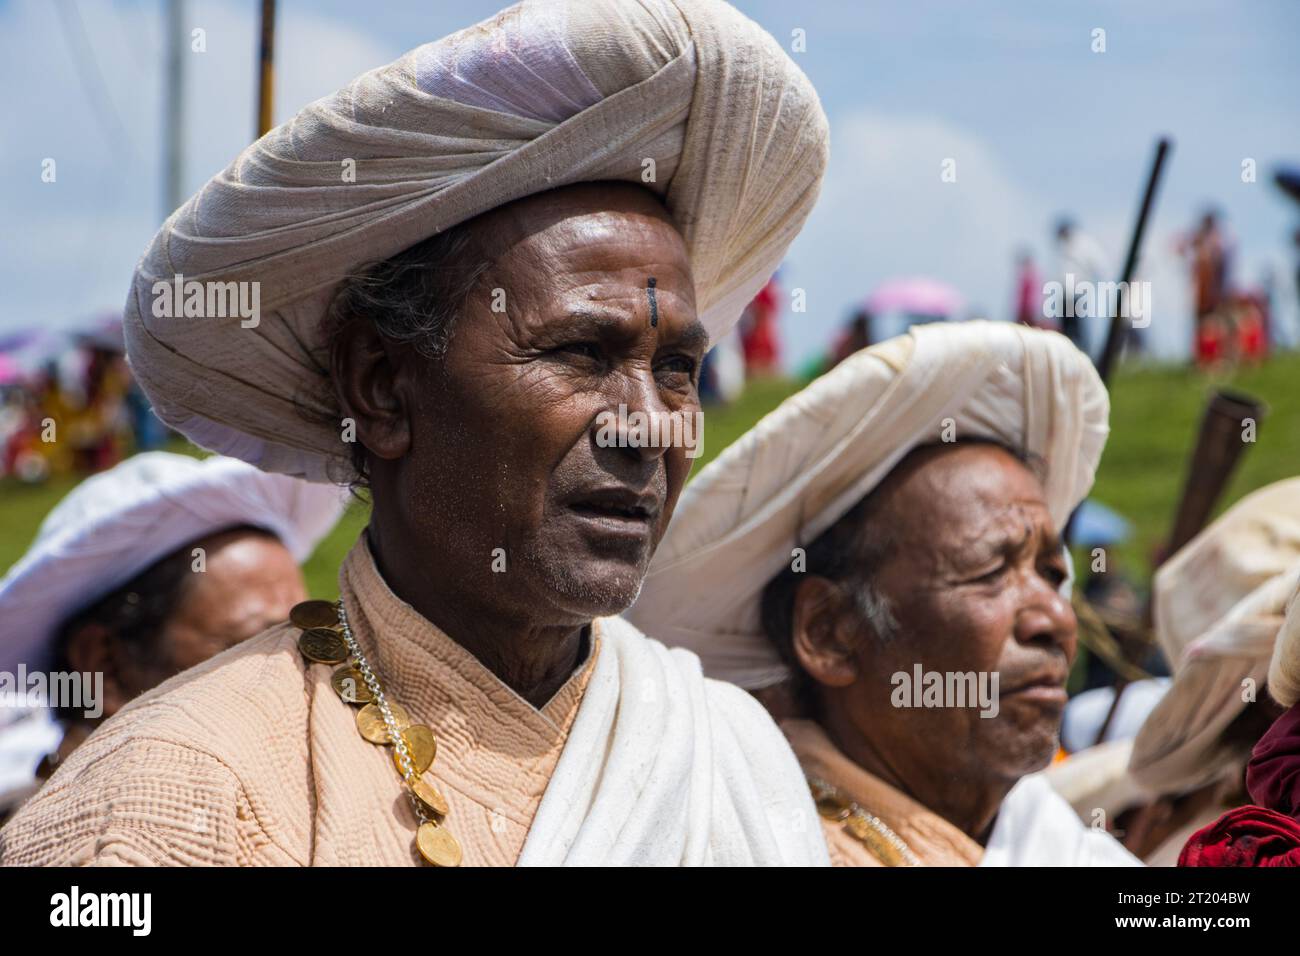 Musicians of Shikhali Jatra wear a saucer hat, beige top and white long skirt secured at the waist by a sash. They wear coin necklaces and play Ponga Stock Photo